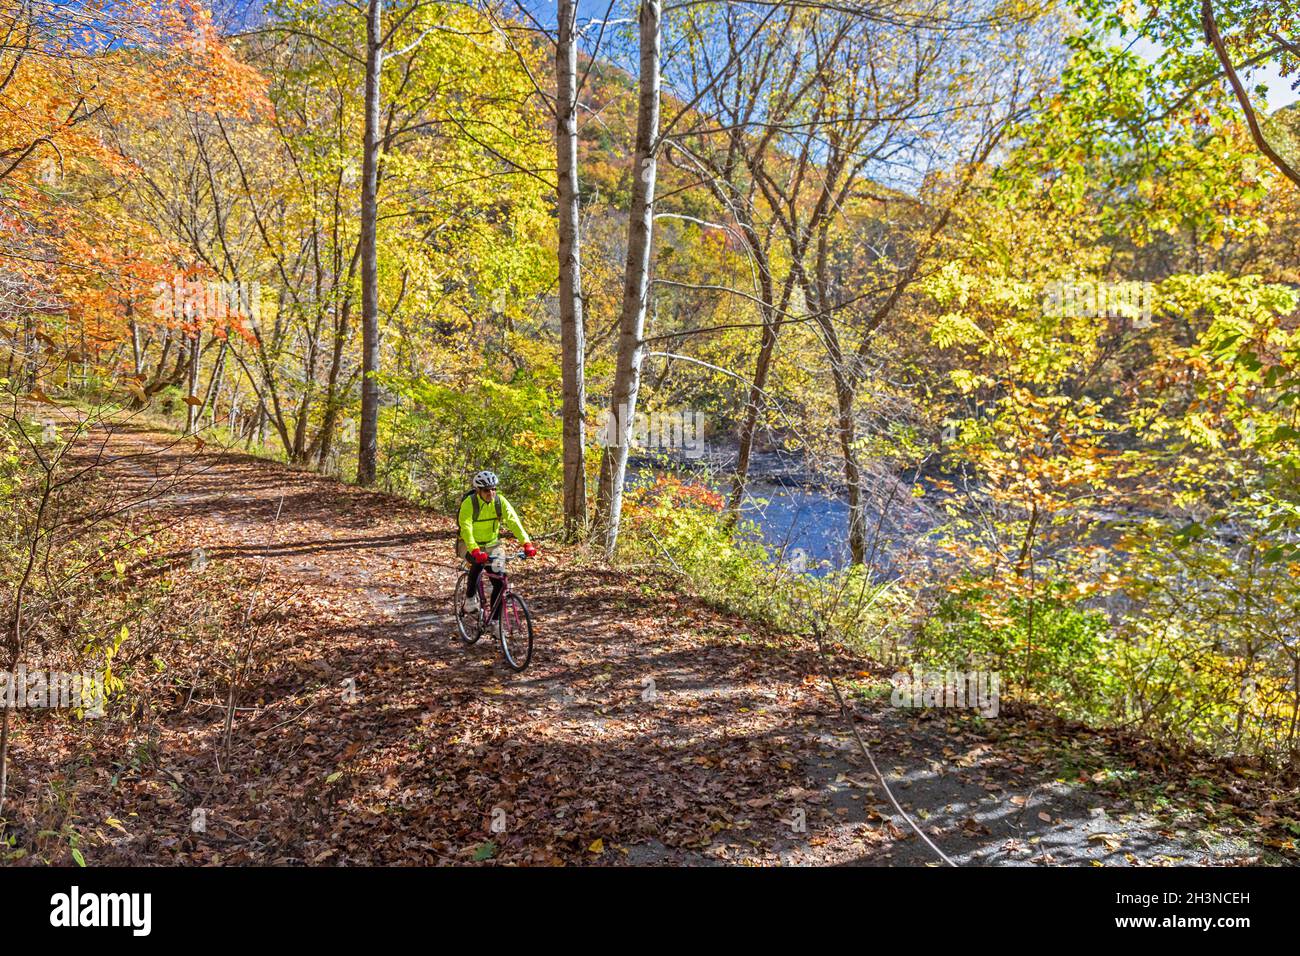 Martinton, West Virginia - John West, 75, rides his bicycle on the Greenbrier River Trail. The 78-mile rail trail runs along the Greenbrier River. Now Stock Photo